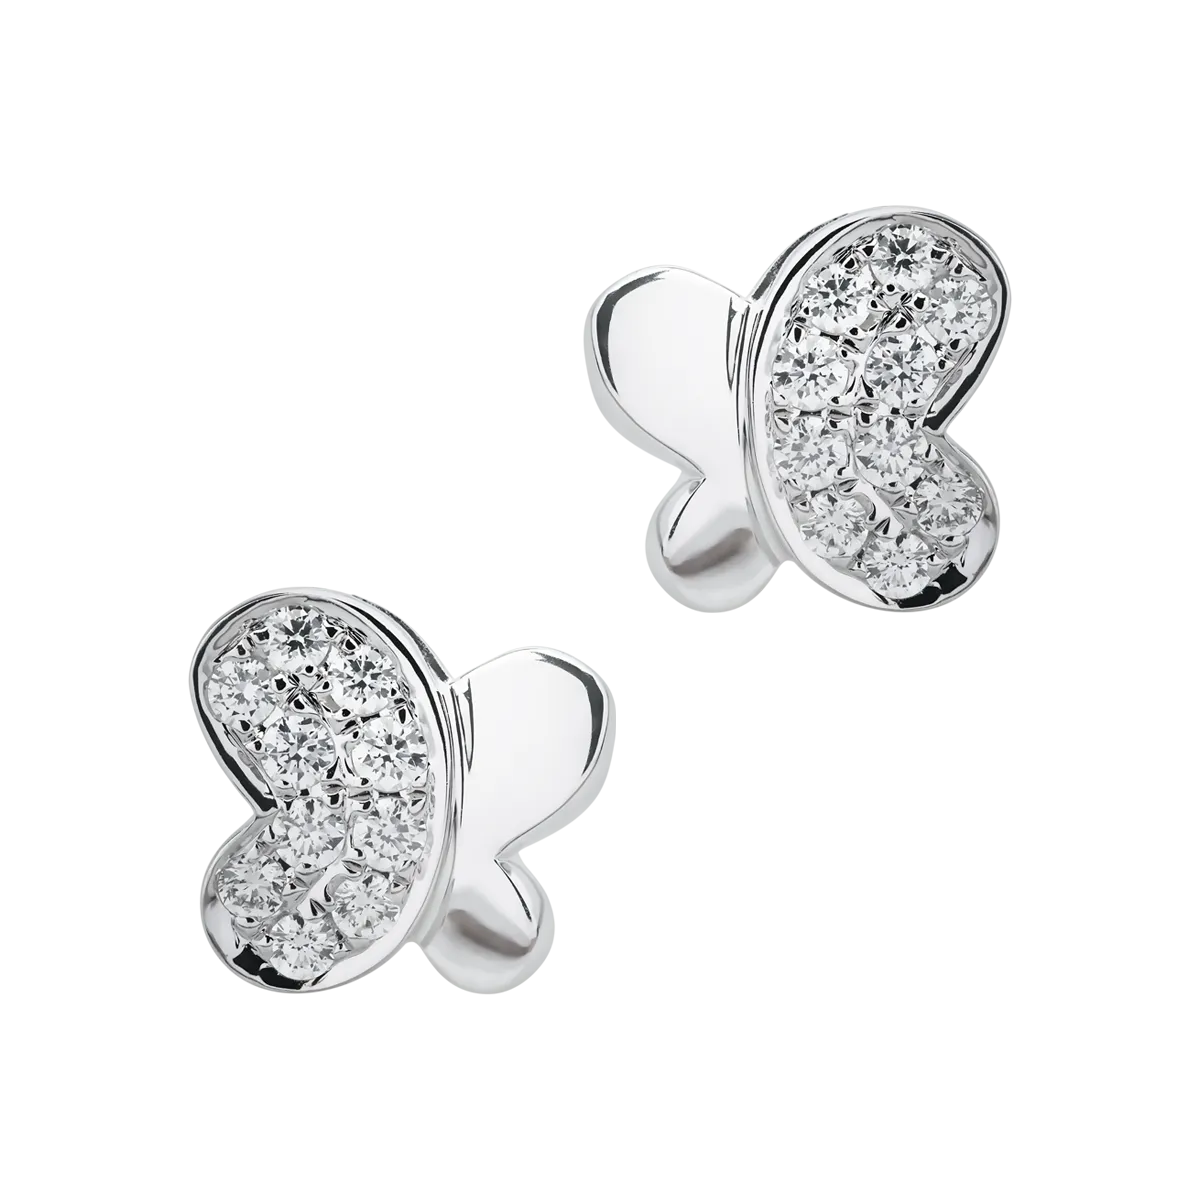 18K white gold earrings with 0.25ct diamonds